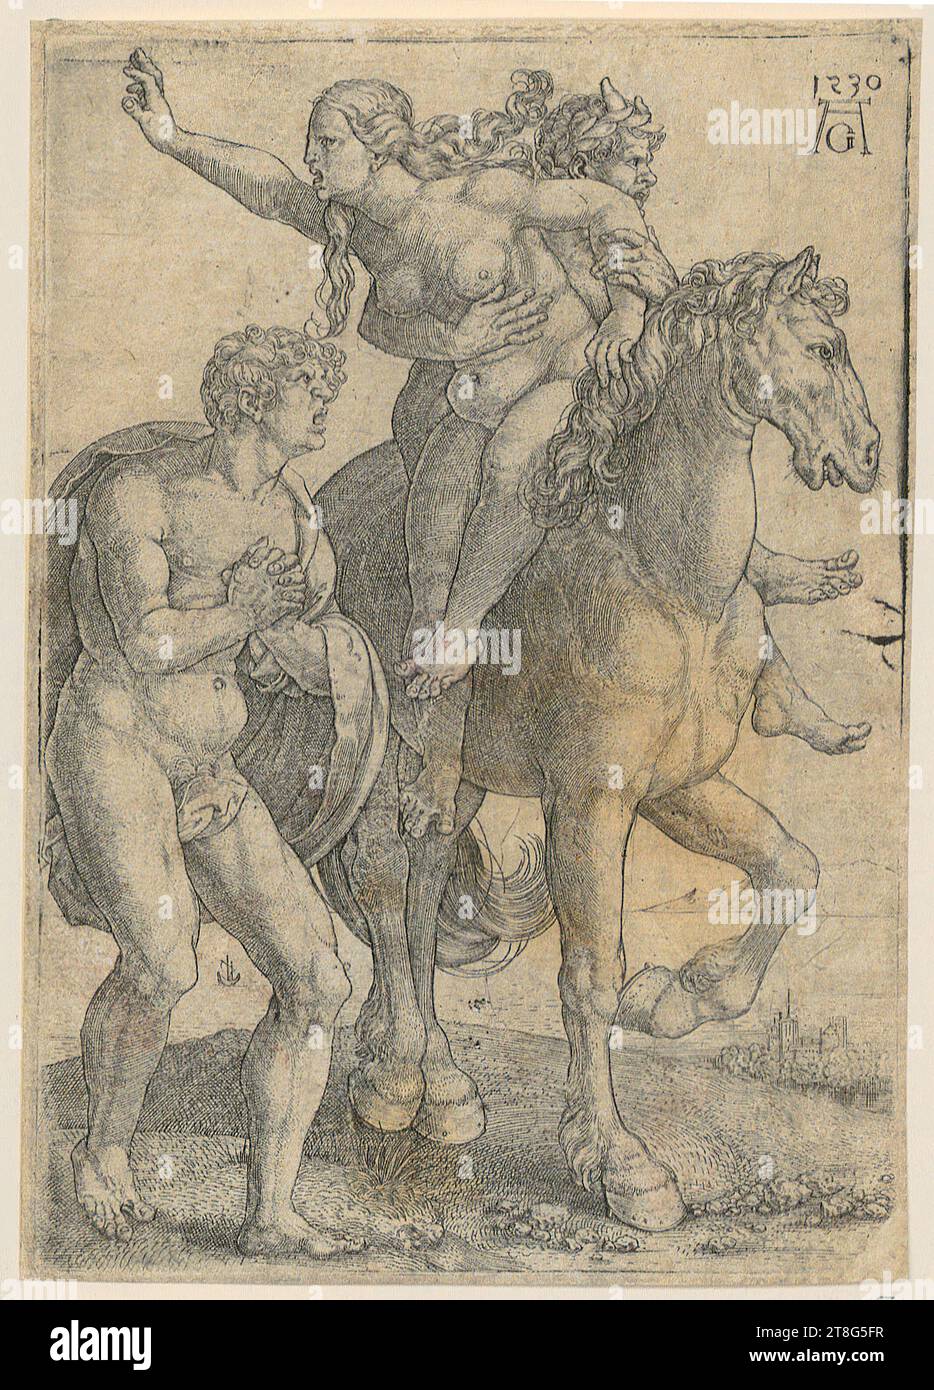 Heinrich Aldegrever (1502 - 1555, 1561), Artist, Rhea Silvia, Heinrich Aldegrever (1502 - 1555, 1561), Satyr forcibly abducts a woman, Print date: 1530, Copperplate engraving, Sheet size: 15.1 x 10.6 cm, Top right dated and monogrammed '1530, AG Stock Photo